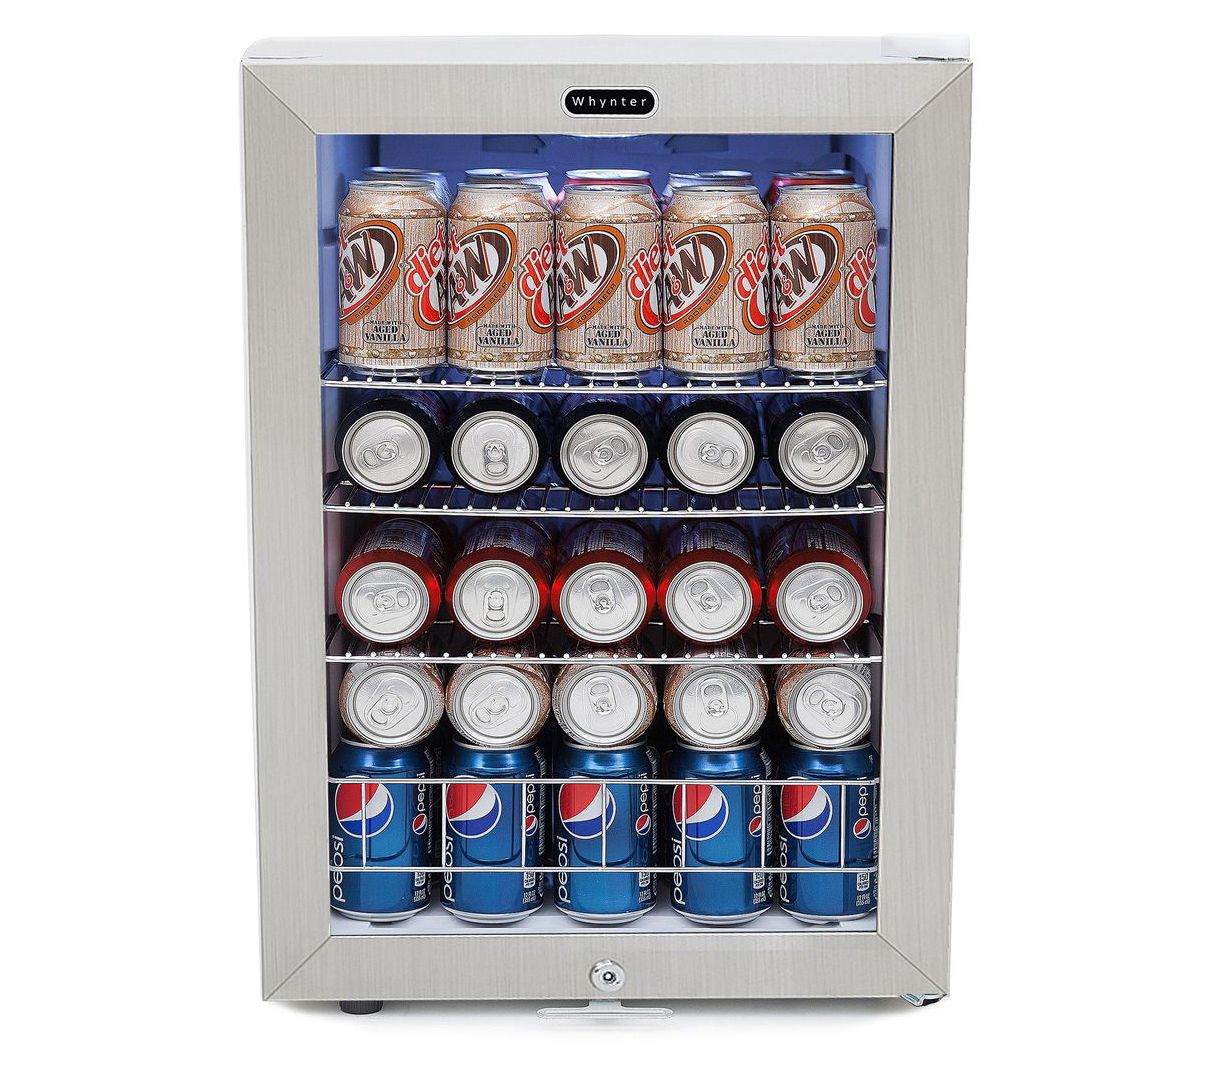 Ivation 126-Can Beverage Refrigerator ,Stainless Steel